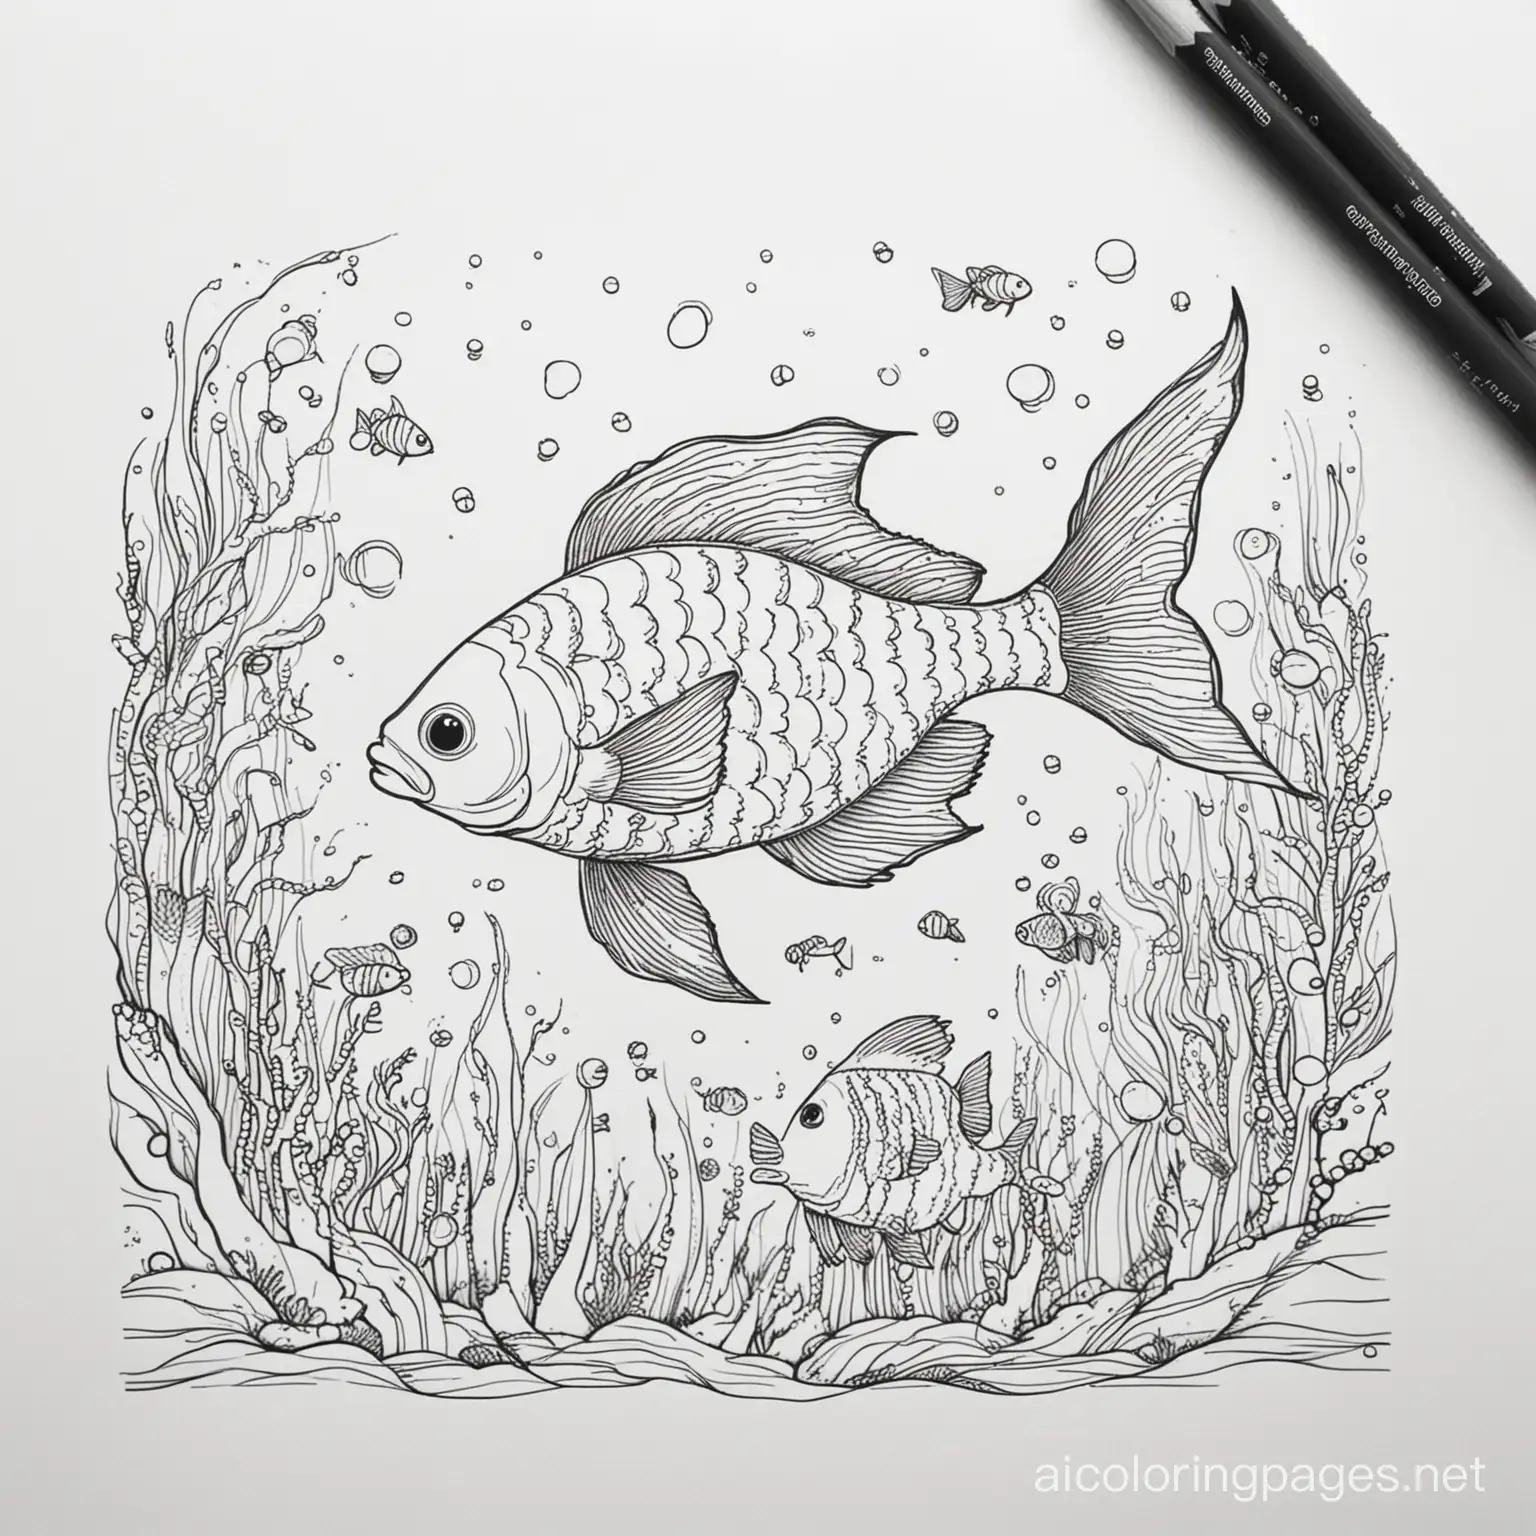 Fish in ocean, Coloring Page, black and white, line art, white background, Simplicity, Ample White Space. The background of the coloring page is plain white to make it easy for young children to color within the lines. The outlines of all the subjects are easy to distinguish, making it simple for kids to color without too much difficulty